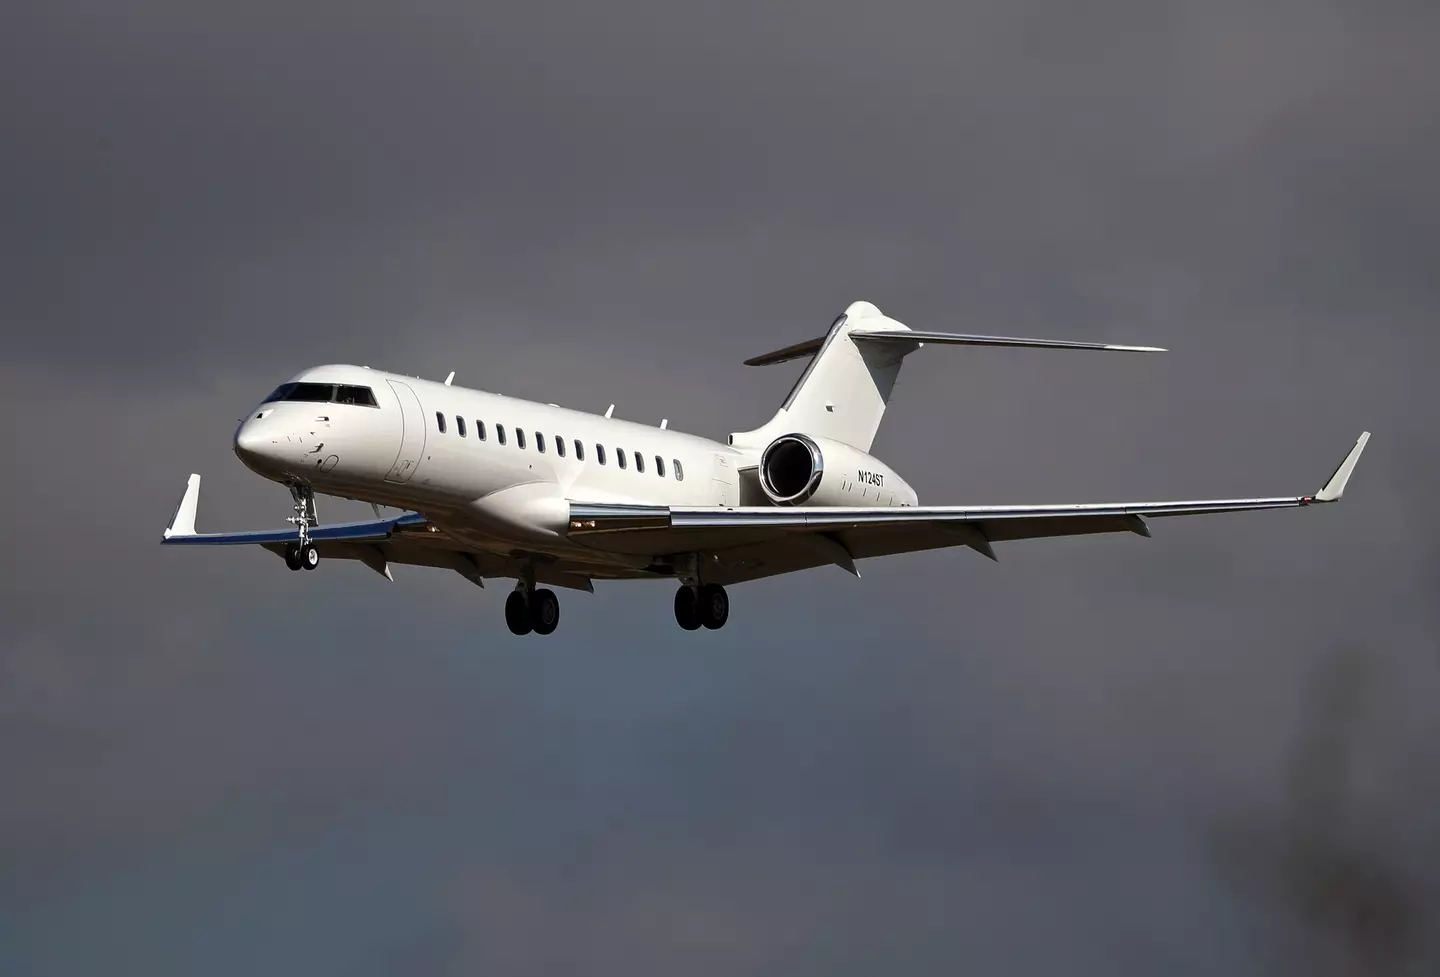 A Bombardier Global 6000, the same model as Taylor Swift's private jet.